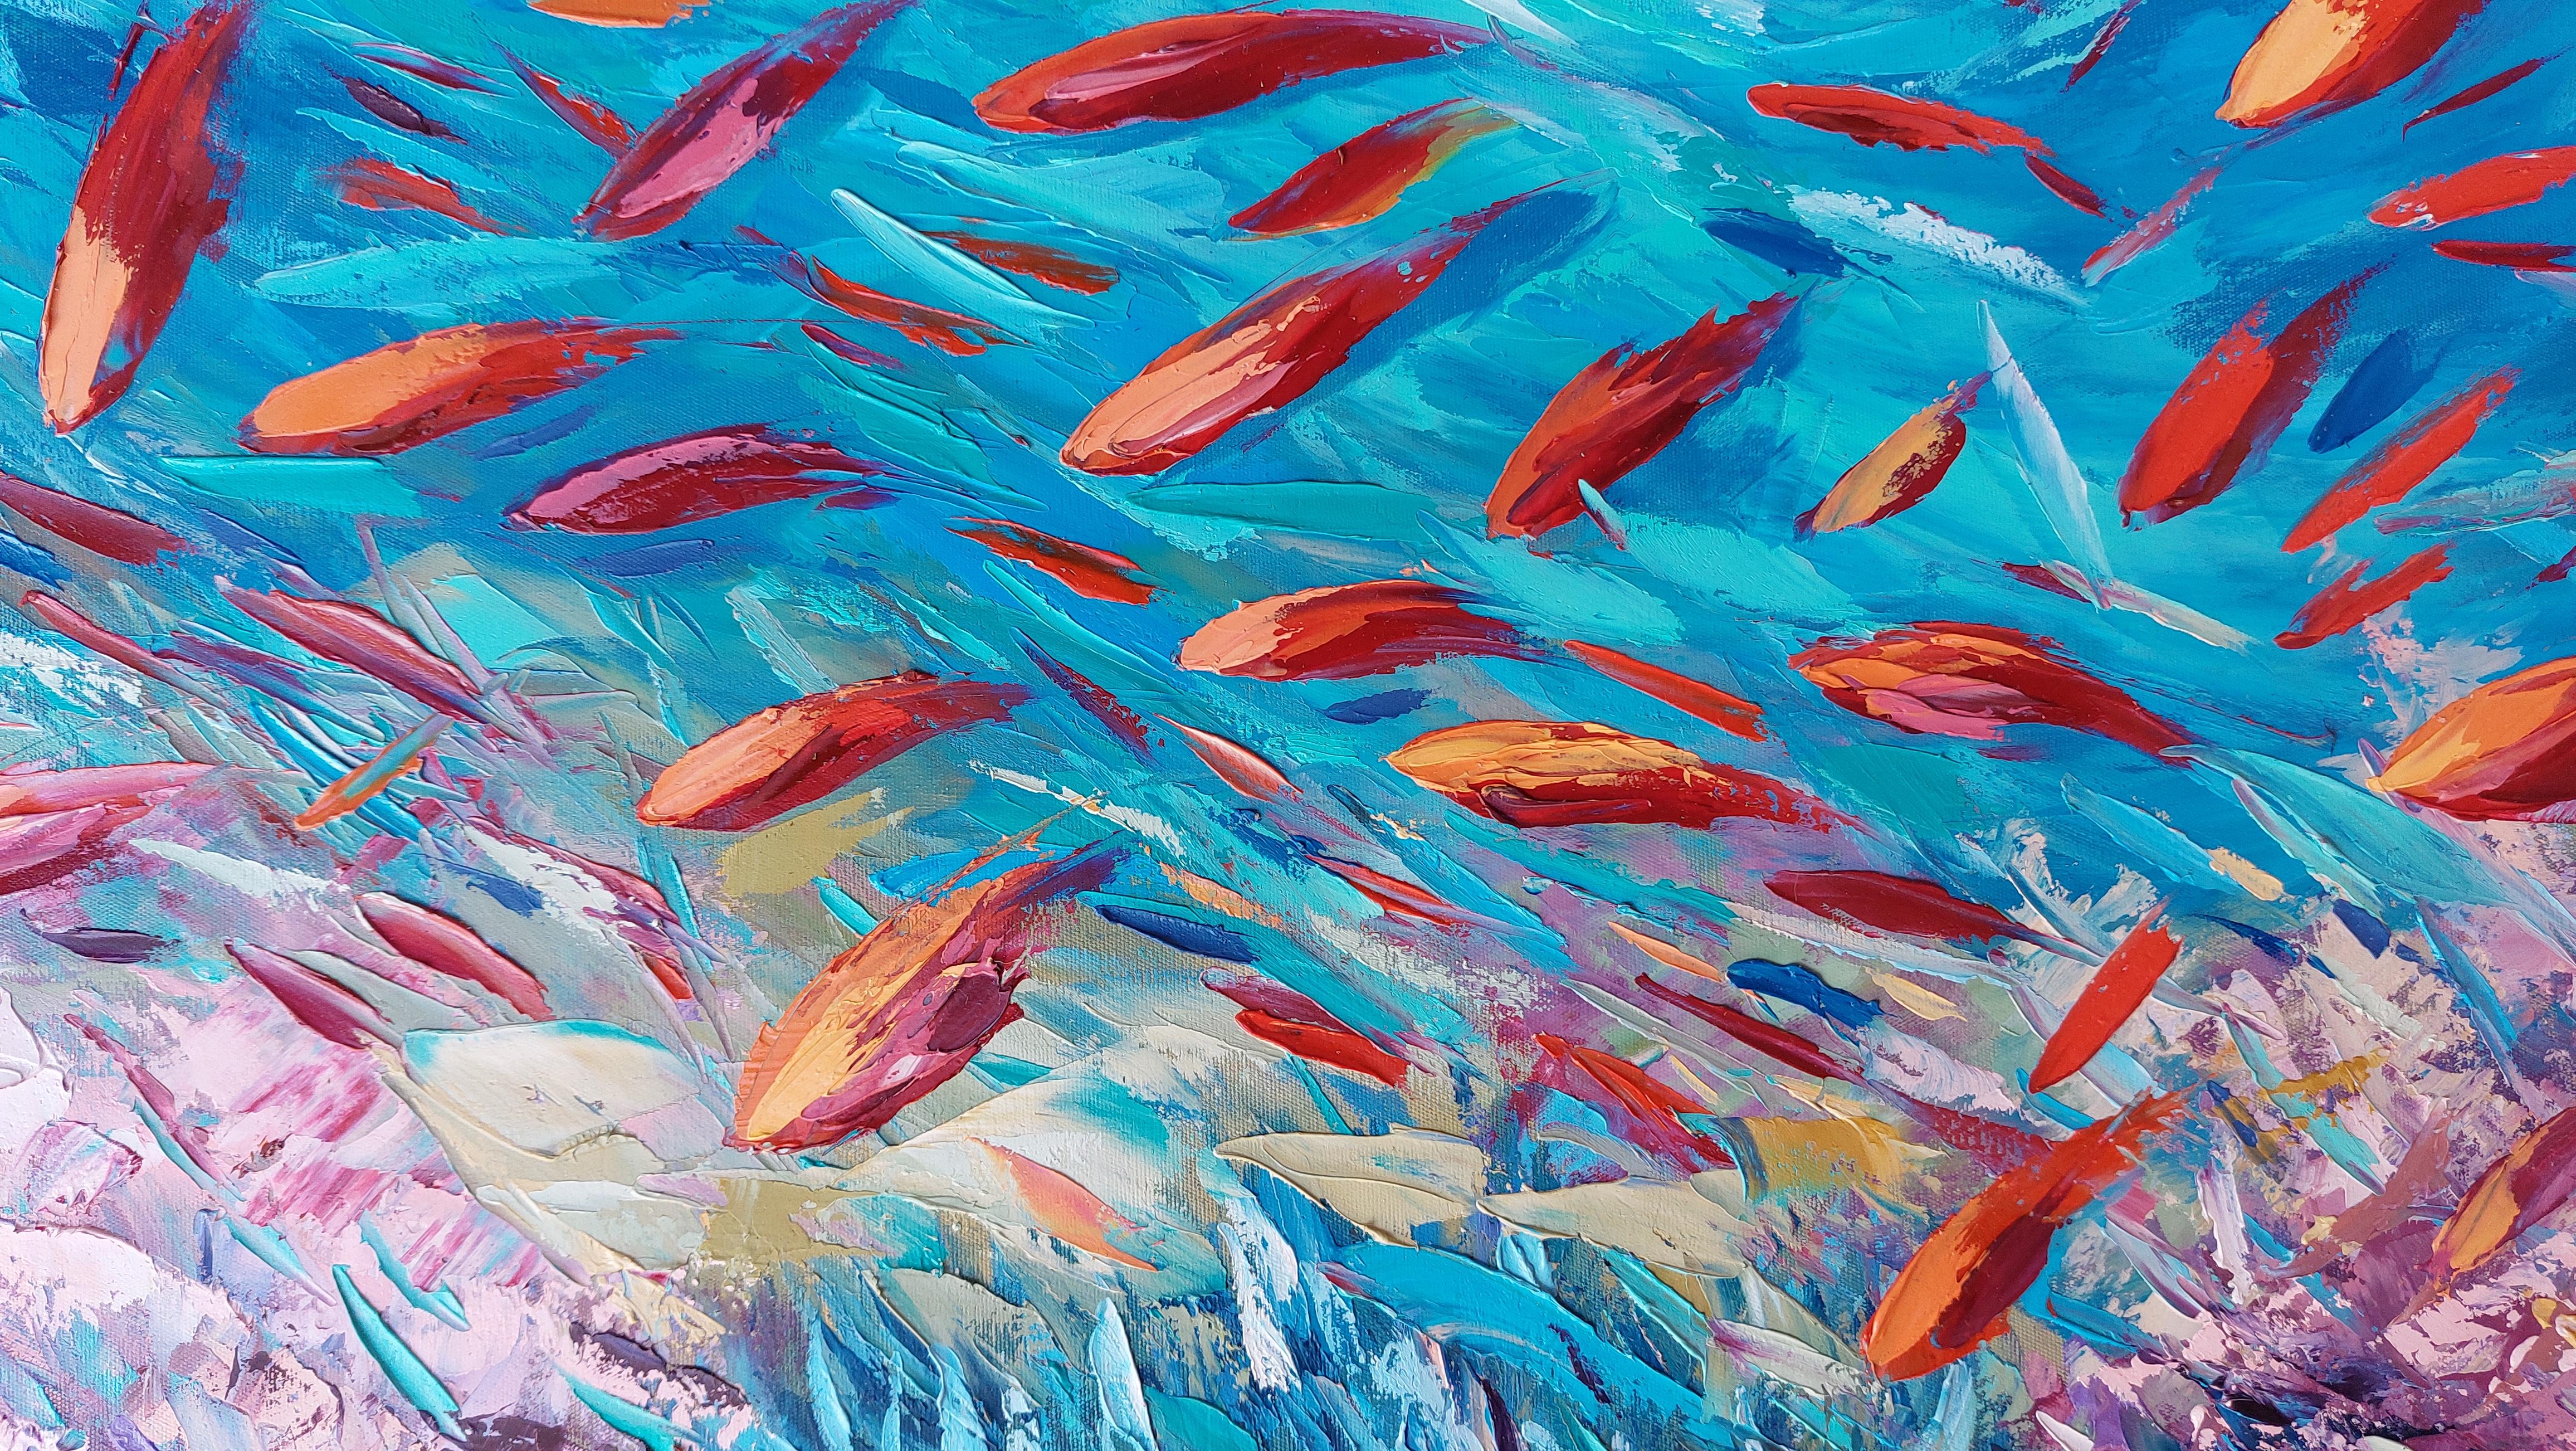 Coral Reef Painting by Olga Nikitina
Title: Coral Reef
Size:80x60cm
Materials: Oil, Stretched Canvas, Palette Knife
Shipping: gallery standards packaging, Express Shipping with tracking number.

Enhance your original oil painting collection with